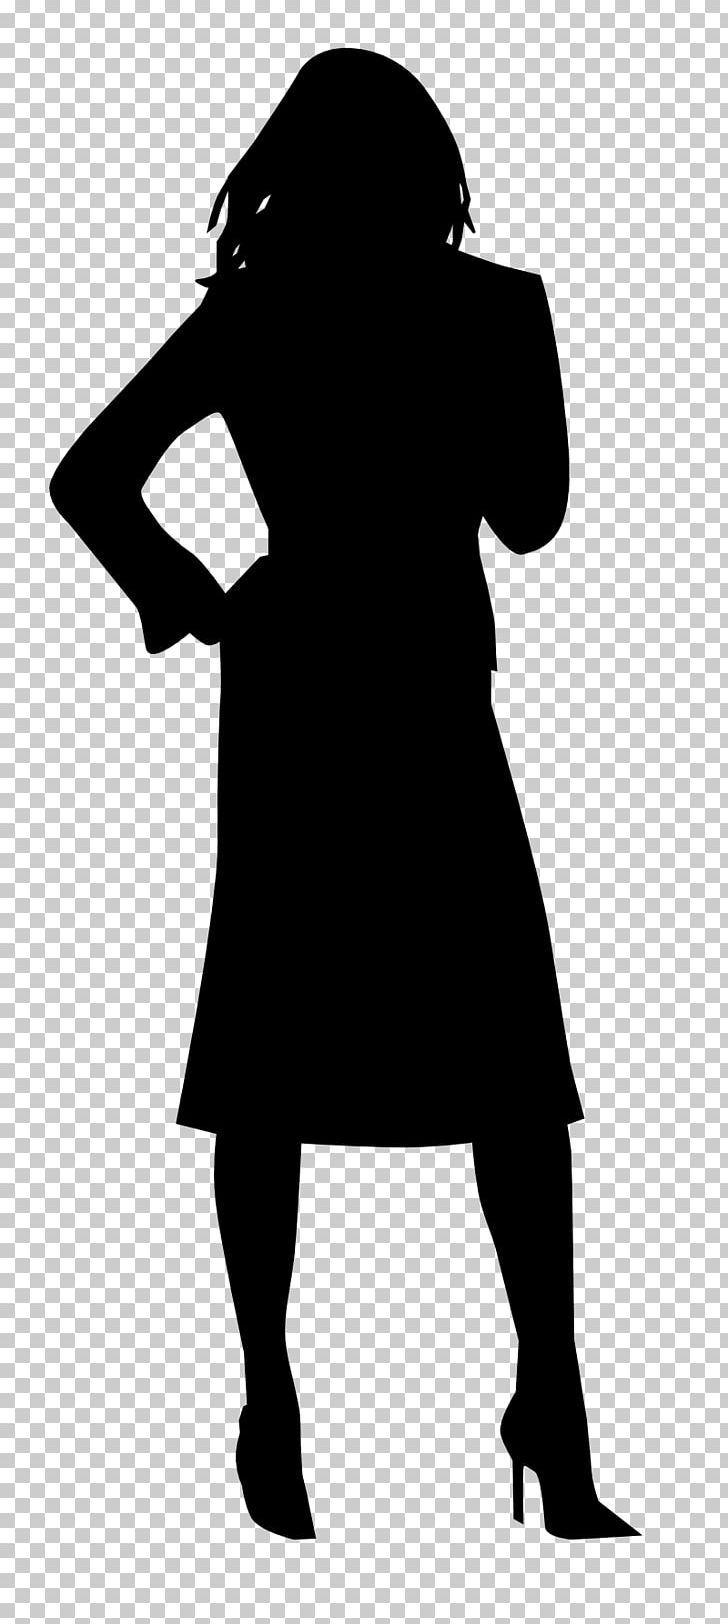 Woman Silhouette PNG, Clipart, Art, Black, Black And White, Black Woman, Clip Art Free PNG Download